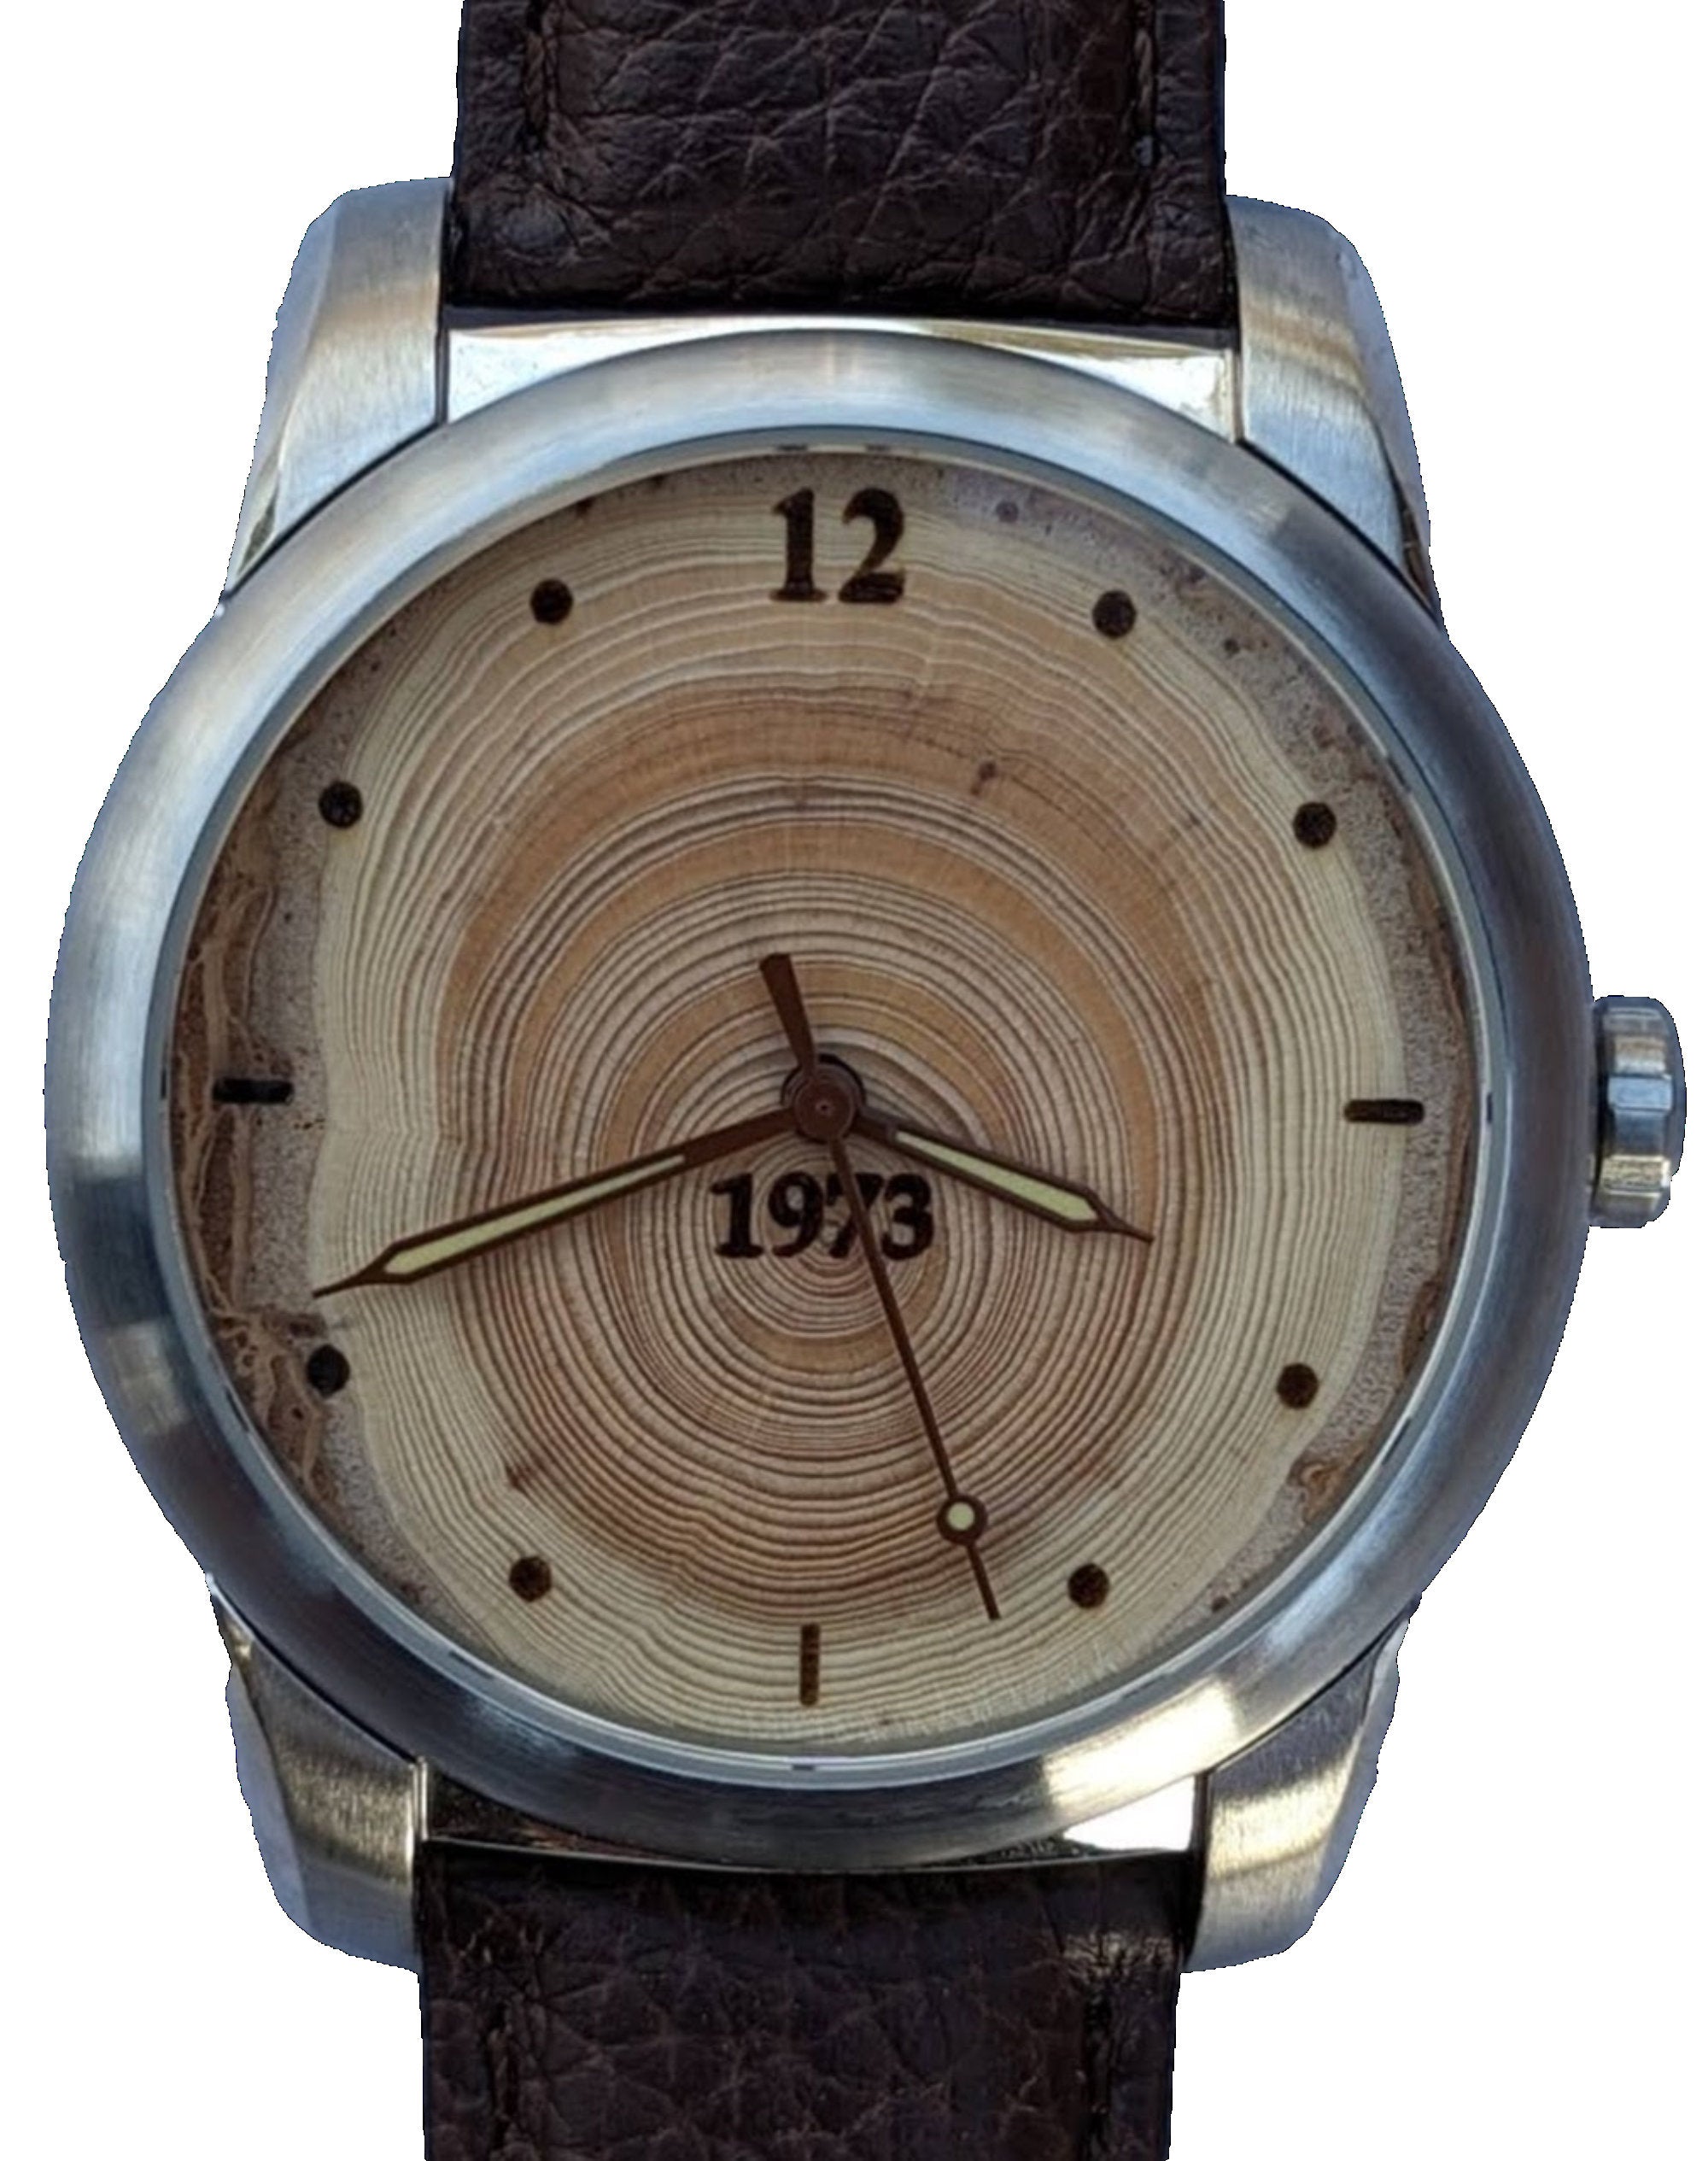 Men's wood watch made of Tree Rings birthday or anniversary Gift. Customize the number of annual tree rings to match recipients birth year.